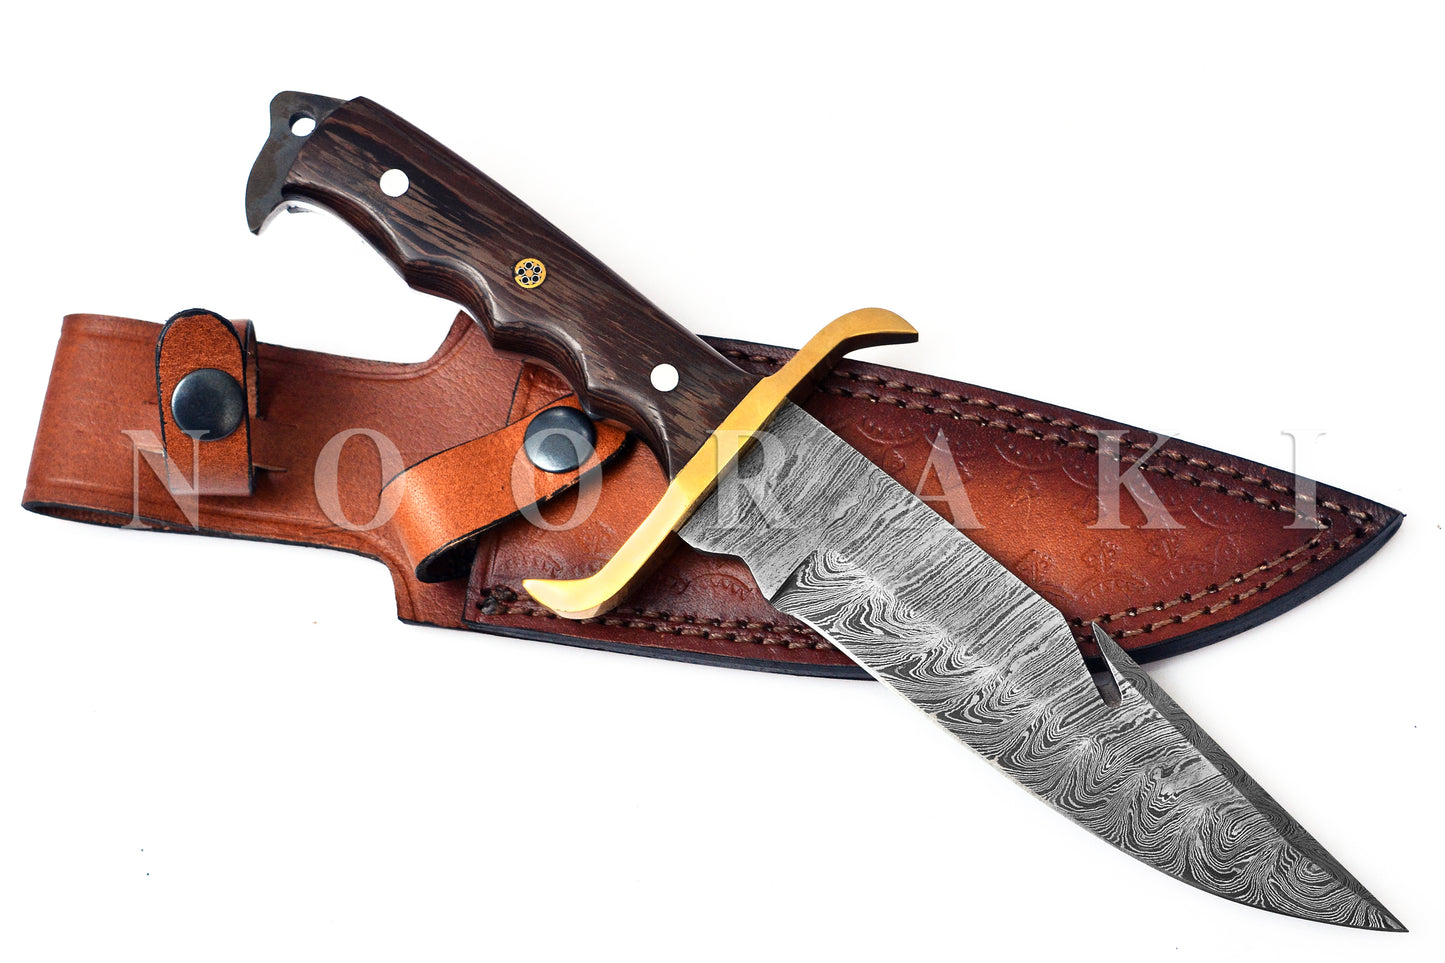 The Damascus Hunter: A 12" Full Tang Masterpiece for Survival and Adventure"